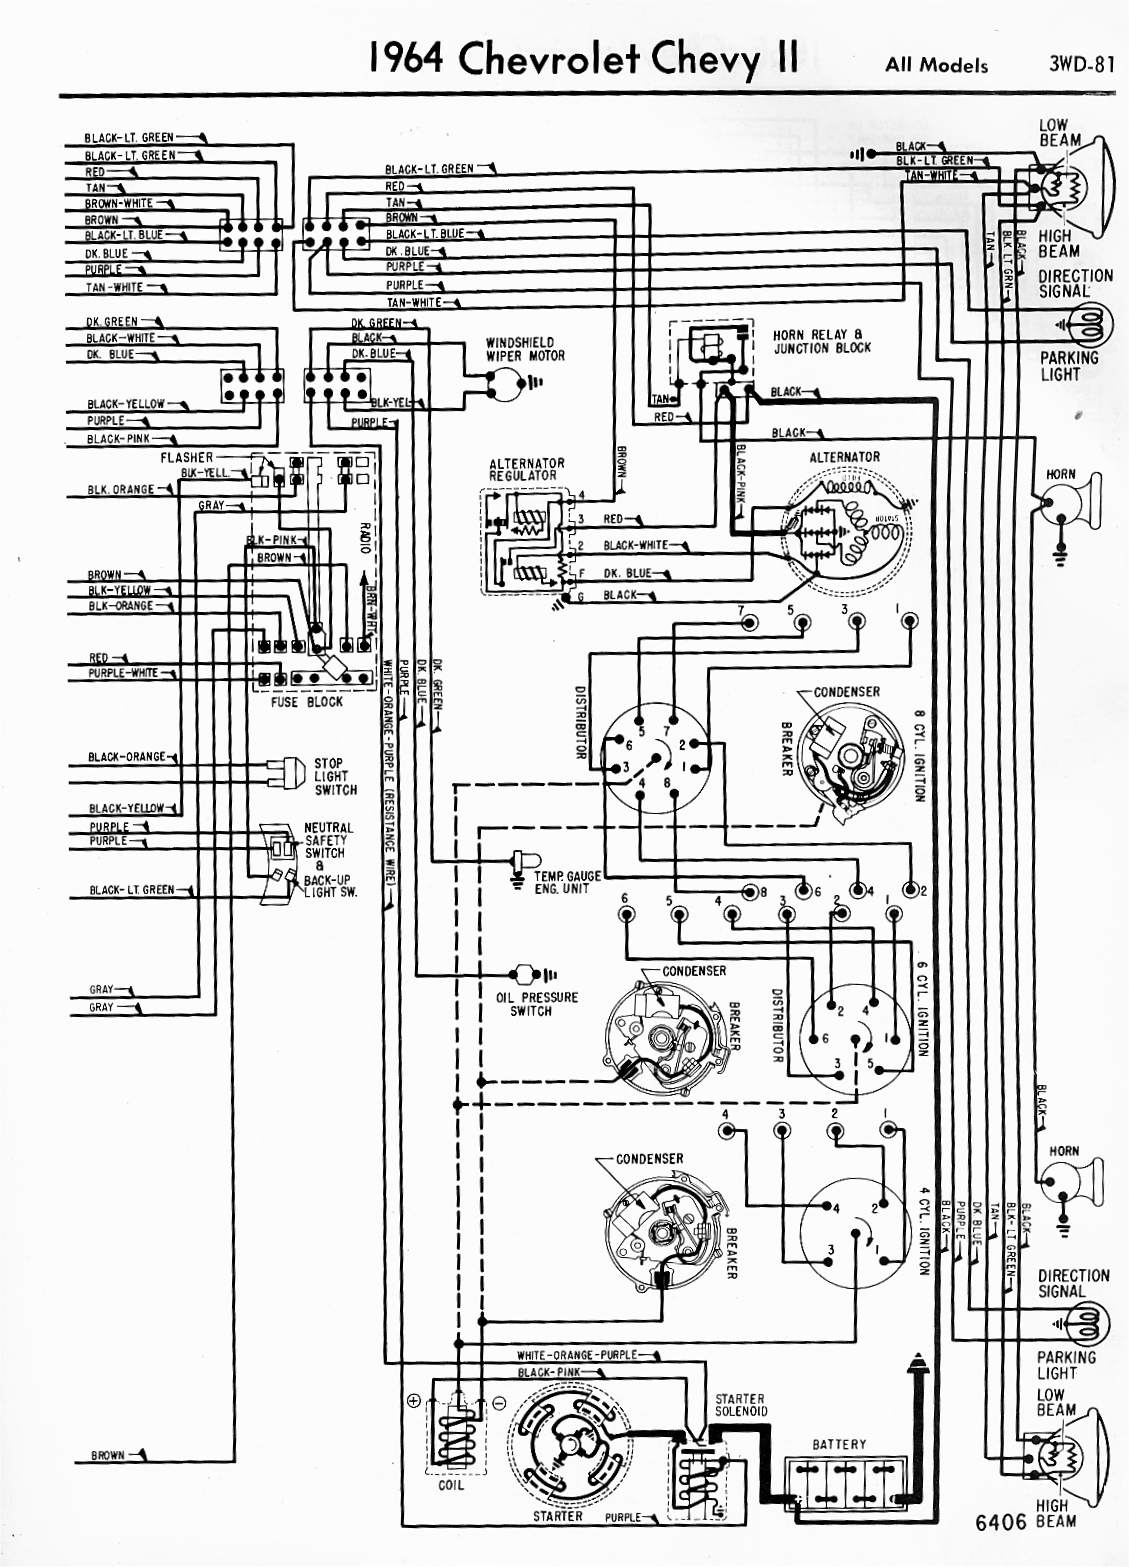 1966 Chevy Bel Air Ignition Switch Wiring Diagram from oldcarmanualproject.com